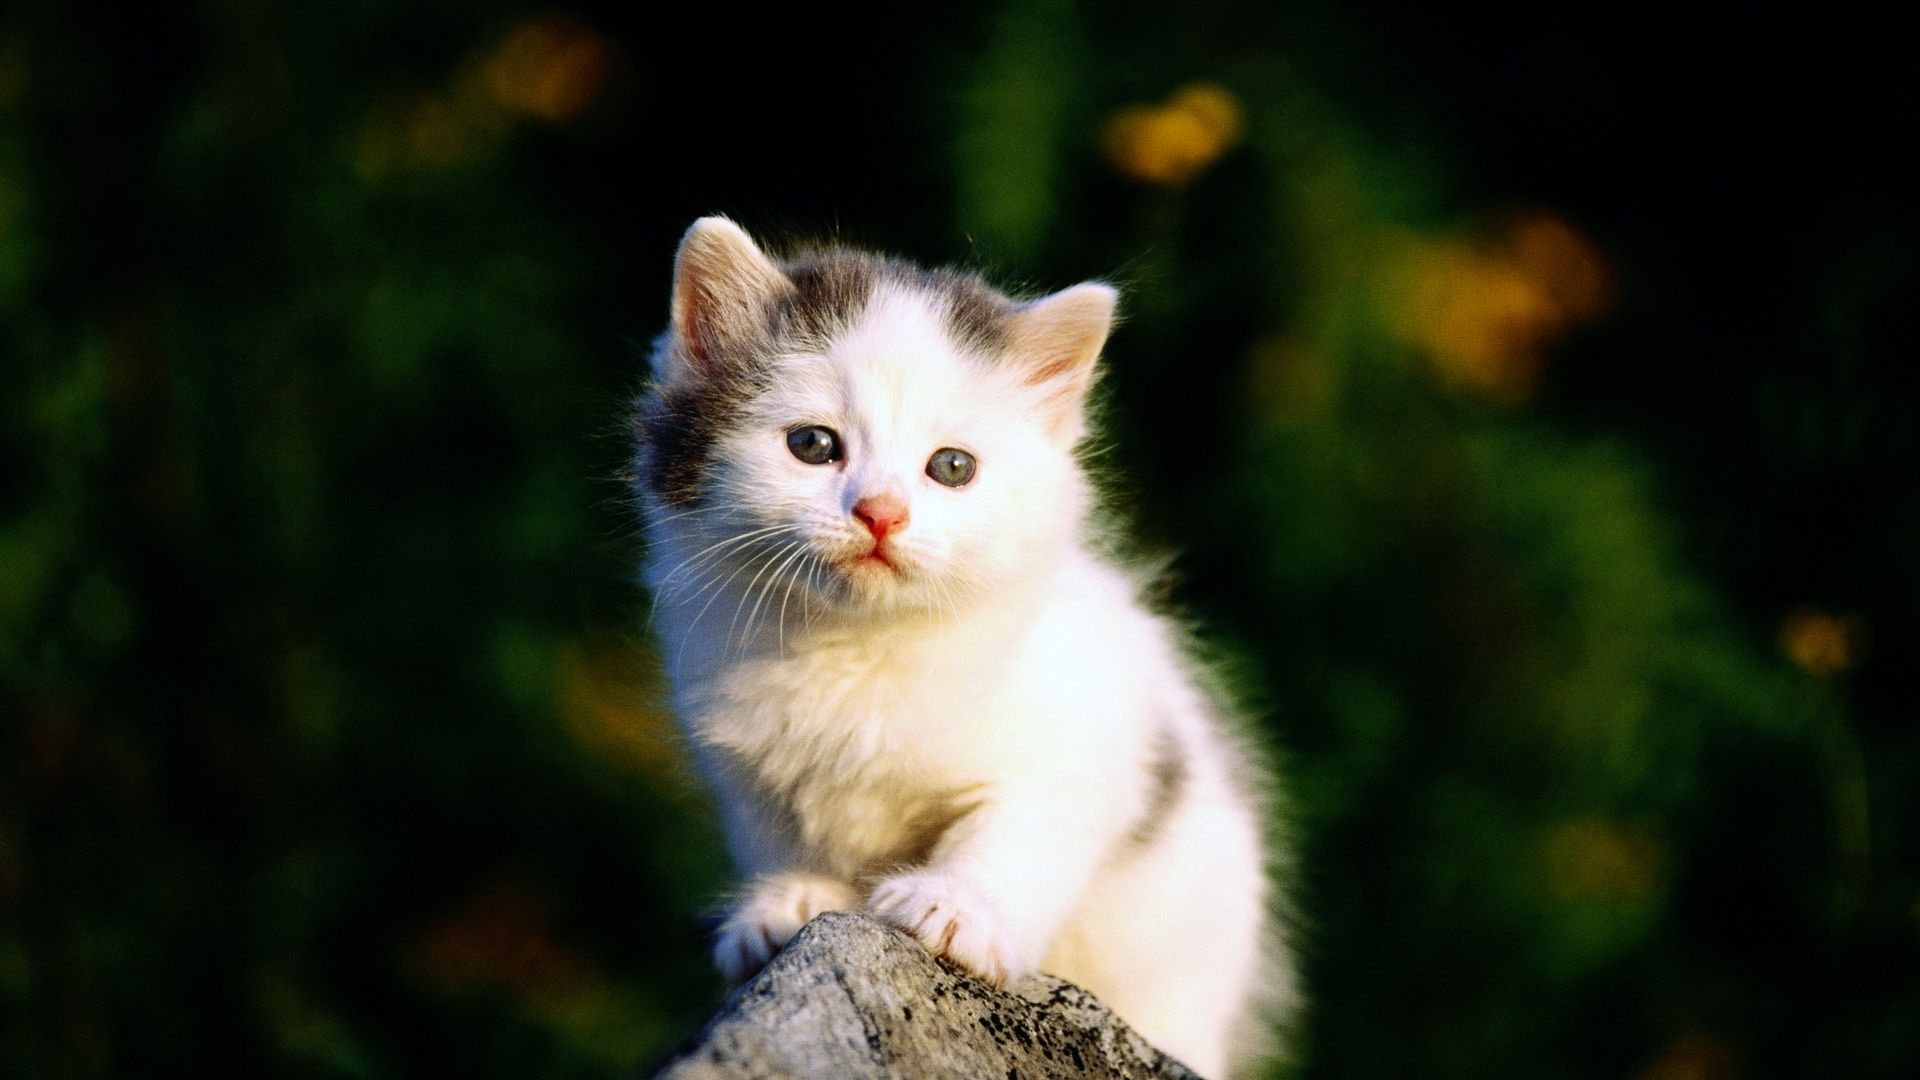 Beautiful Cute And Sweet Cat Wallpaper Are Waiting For Your To